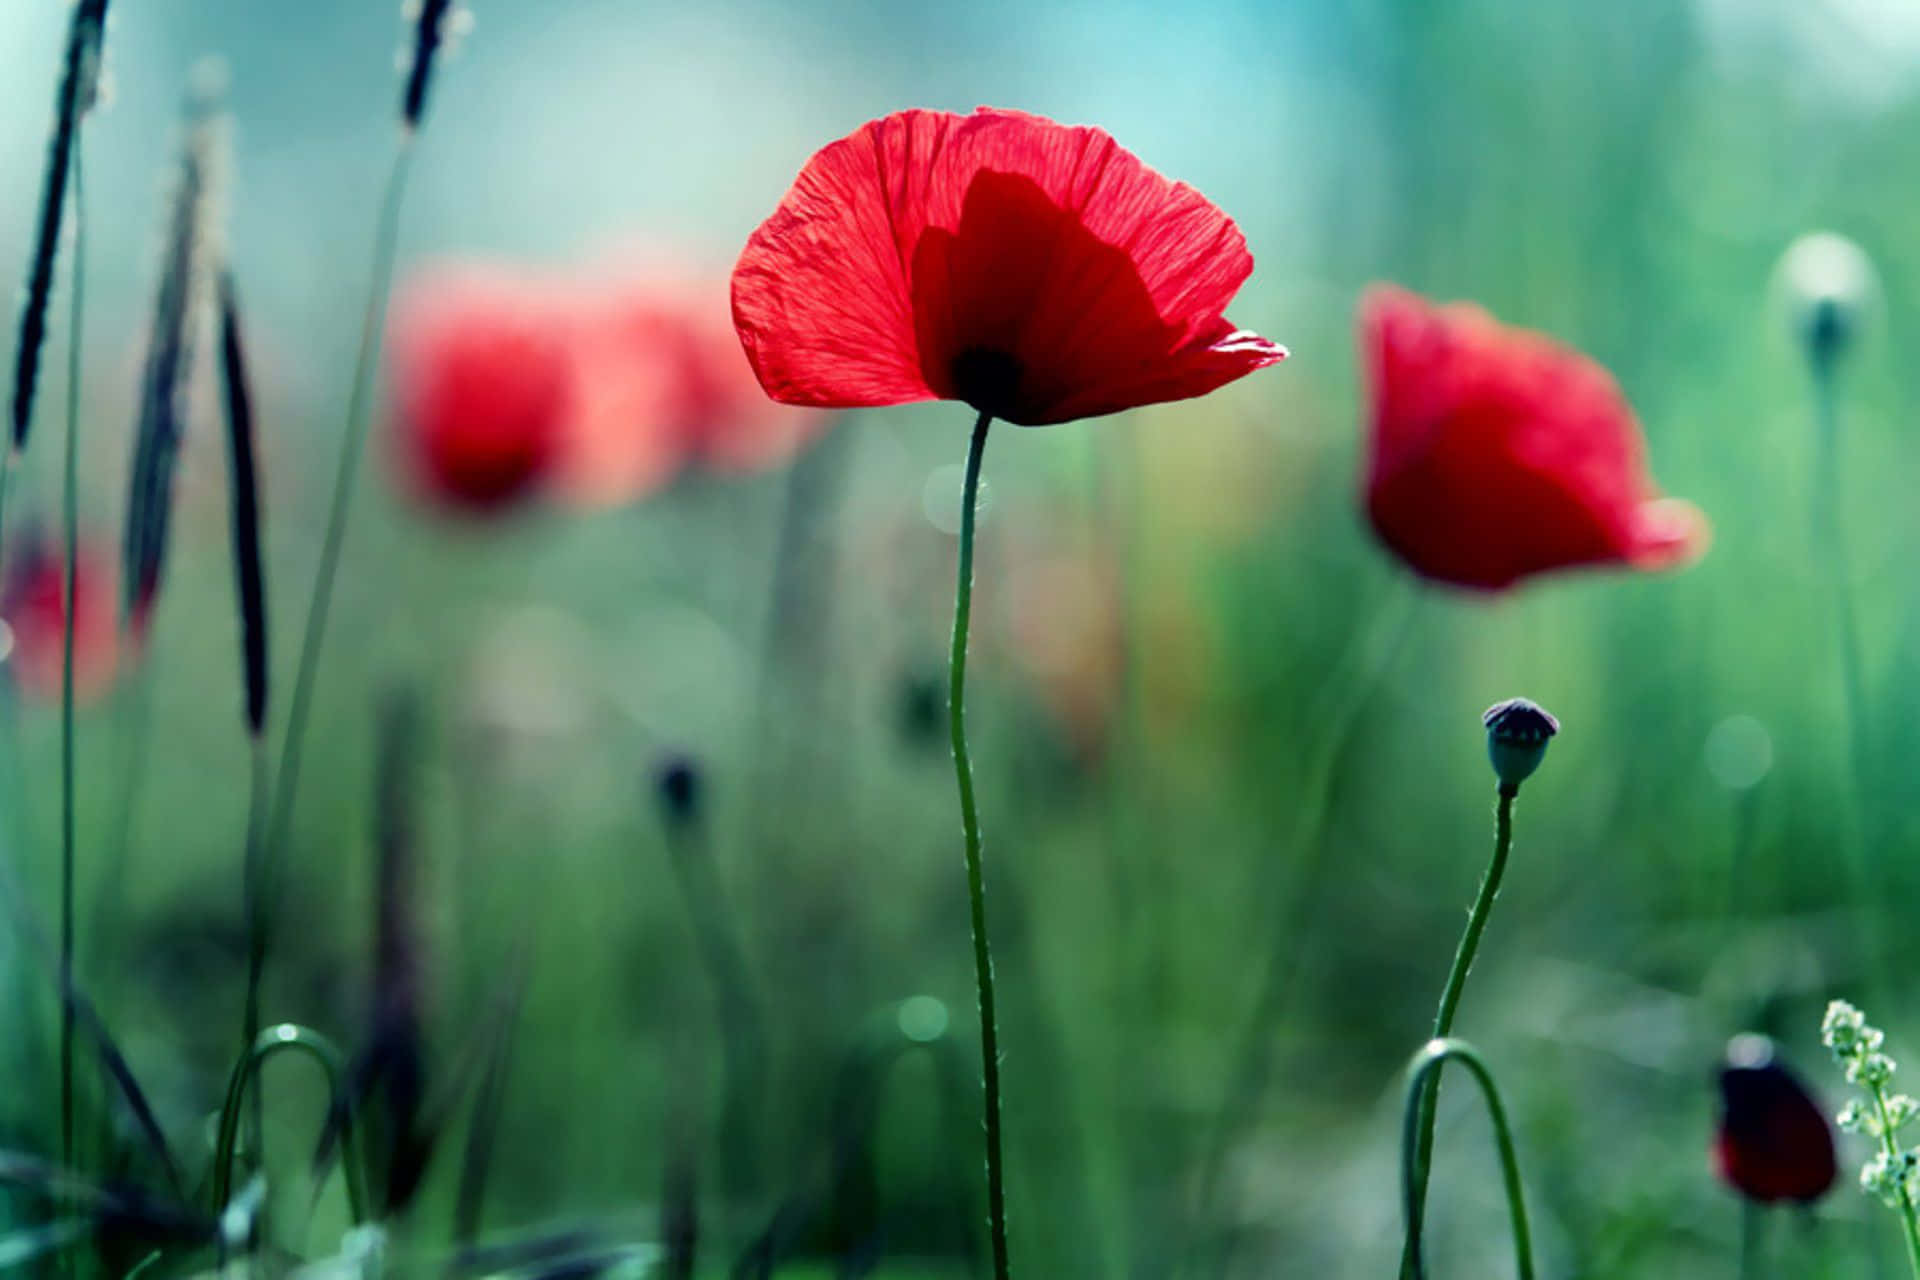 Poppy, a sign of strength, courage, and resilience.